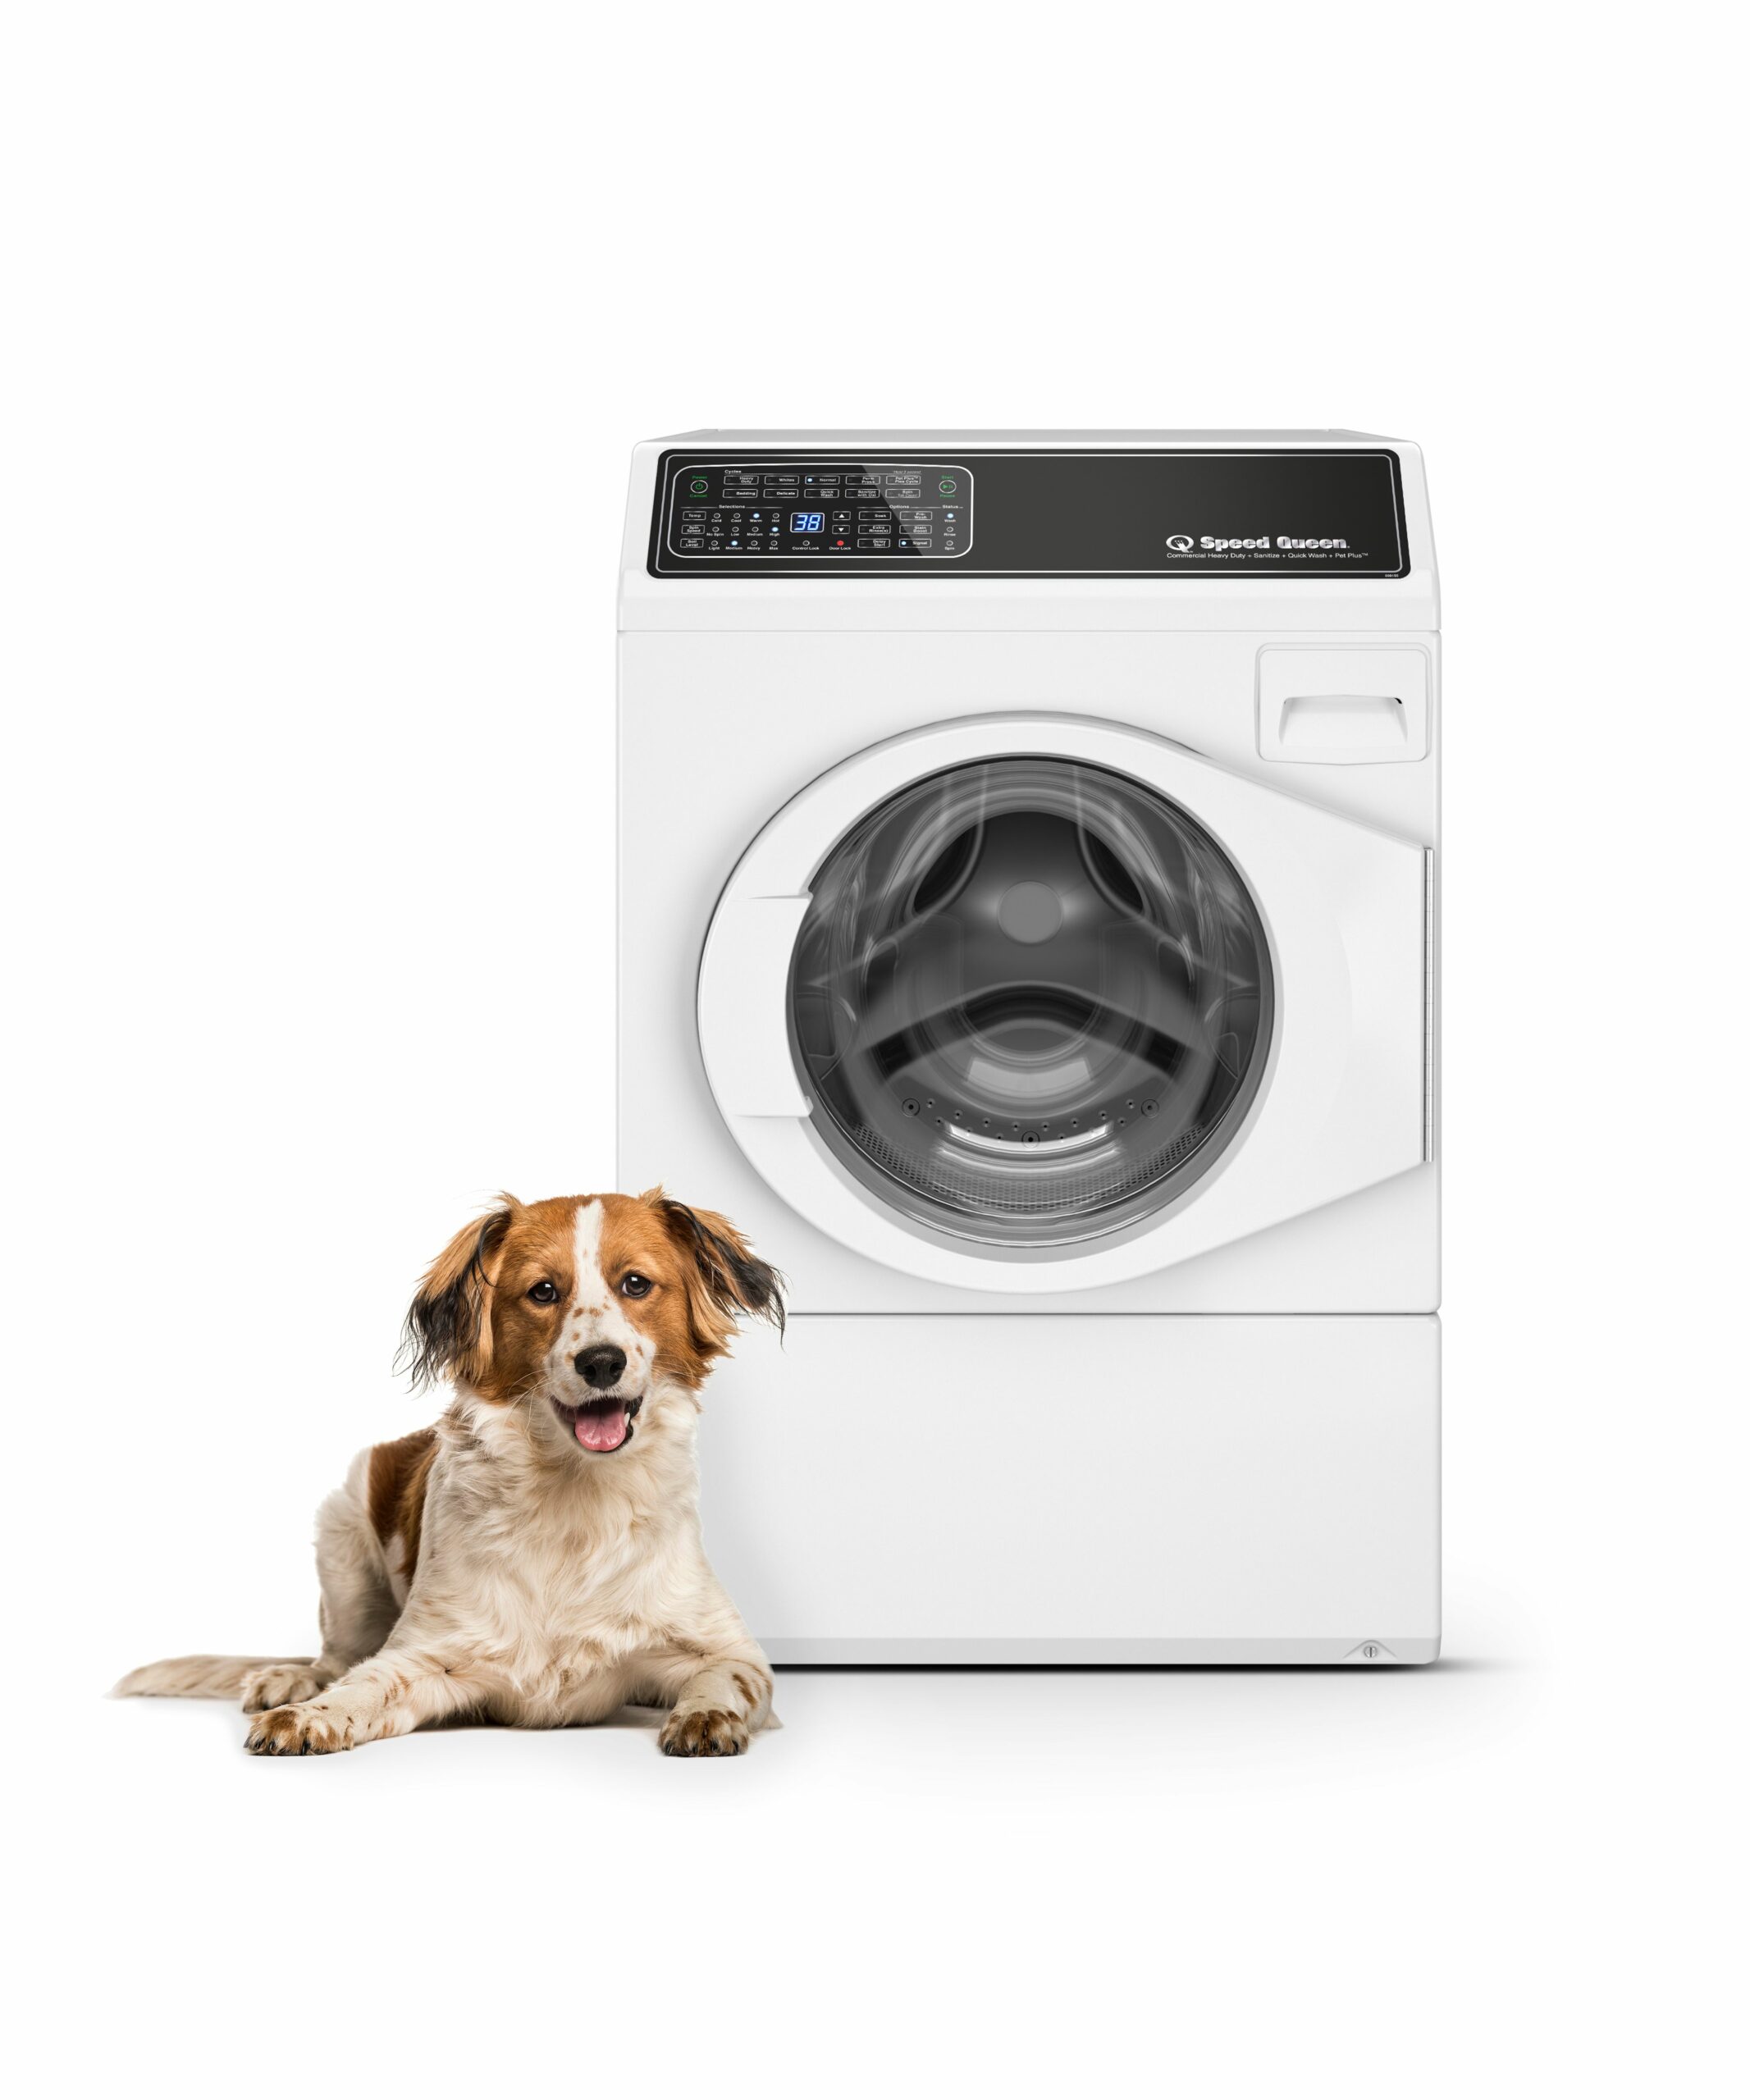 Speed Queen Washing Machines Laundry Appliances - FF7008WN